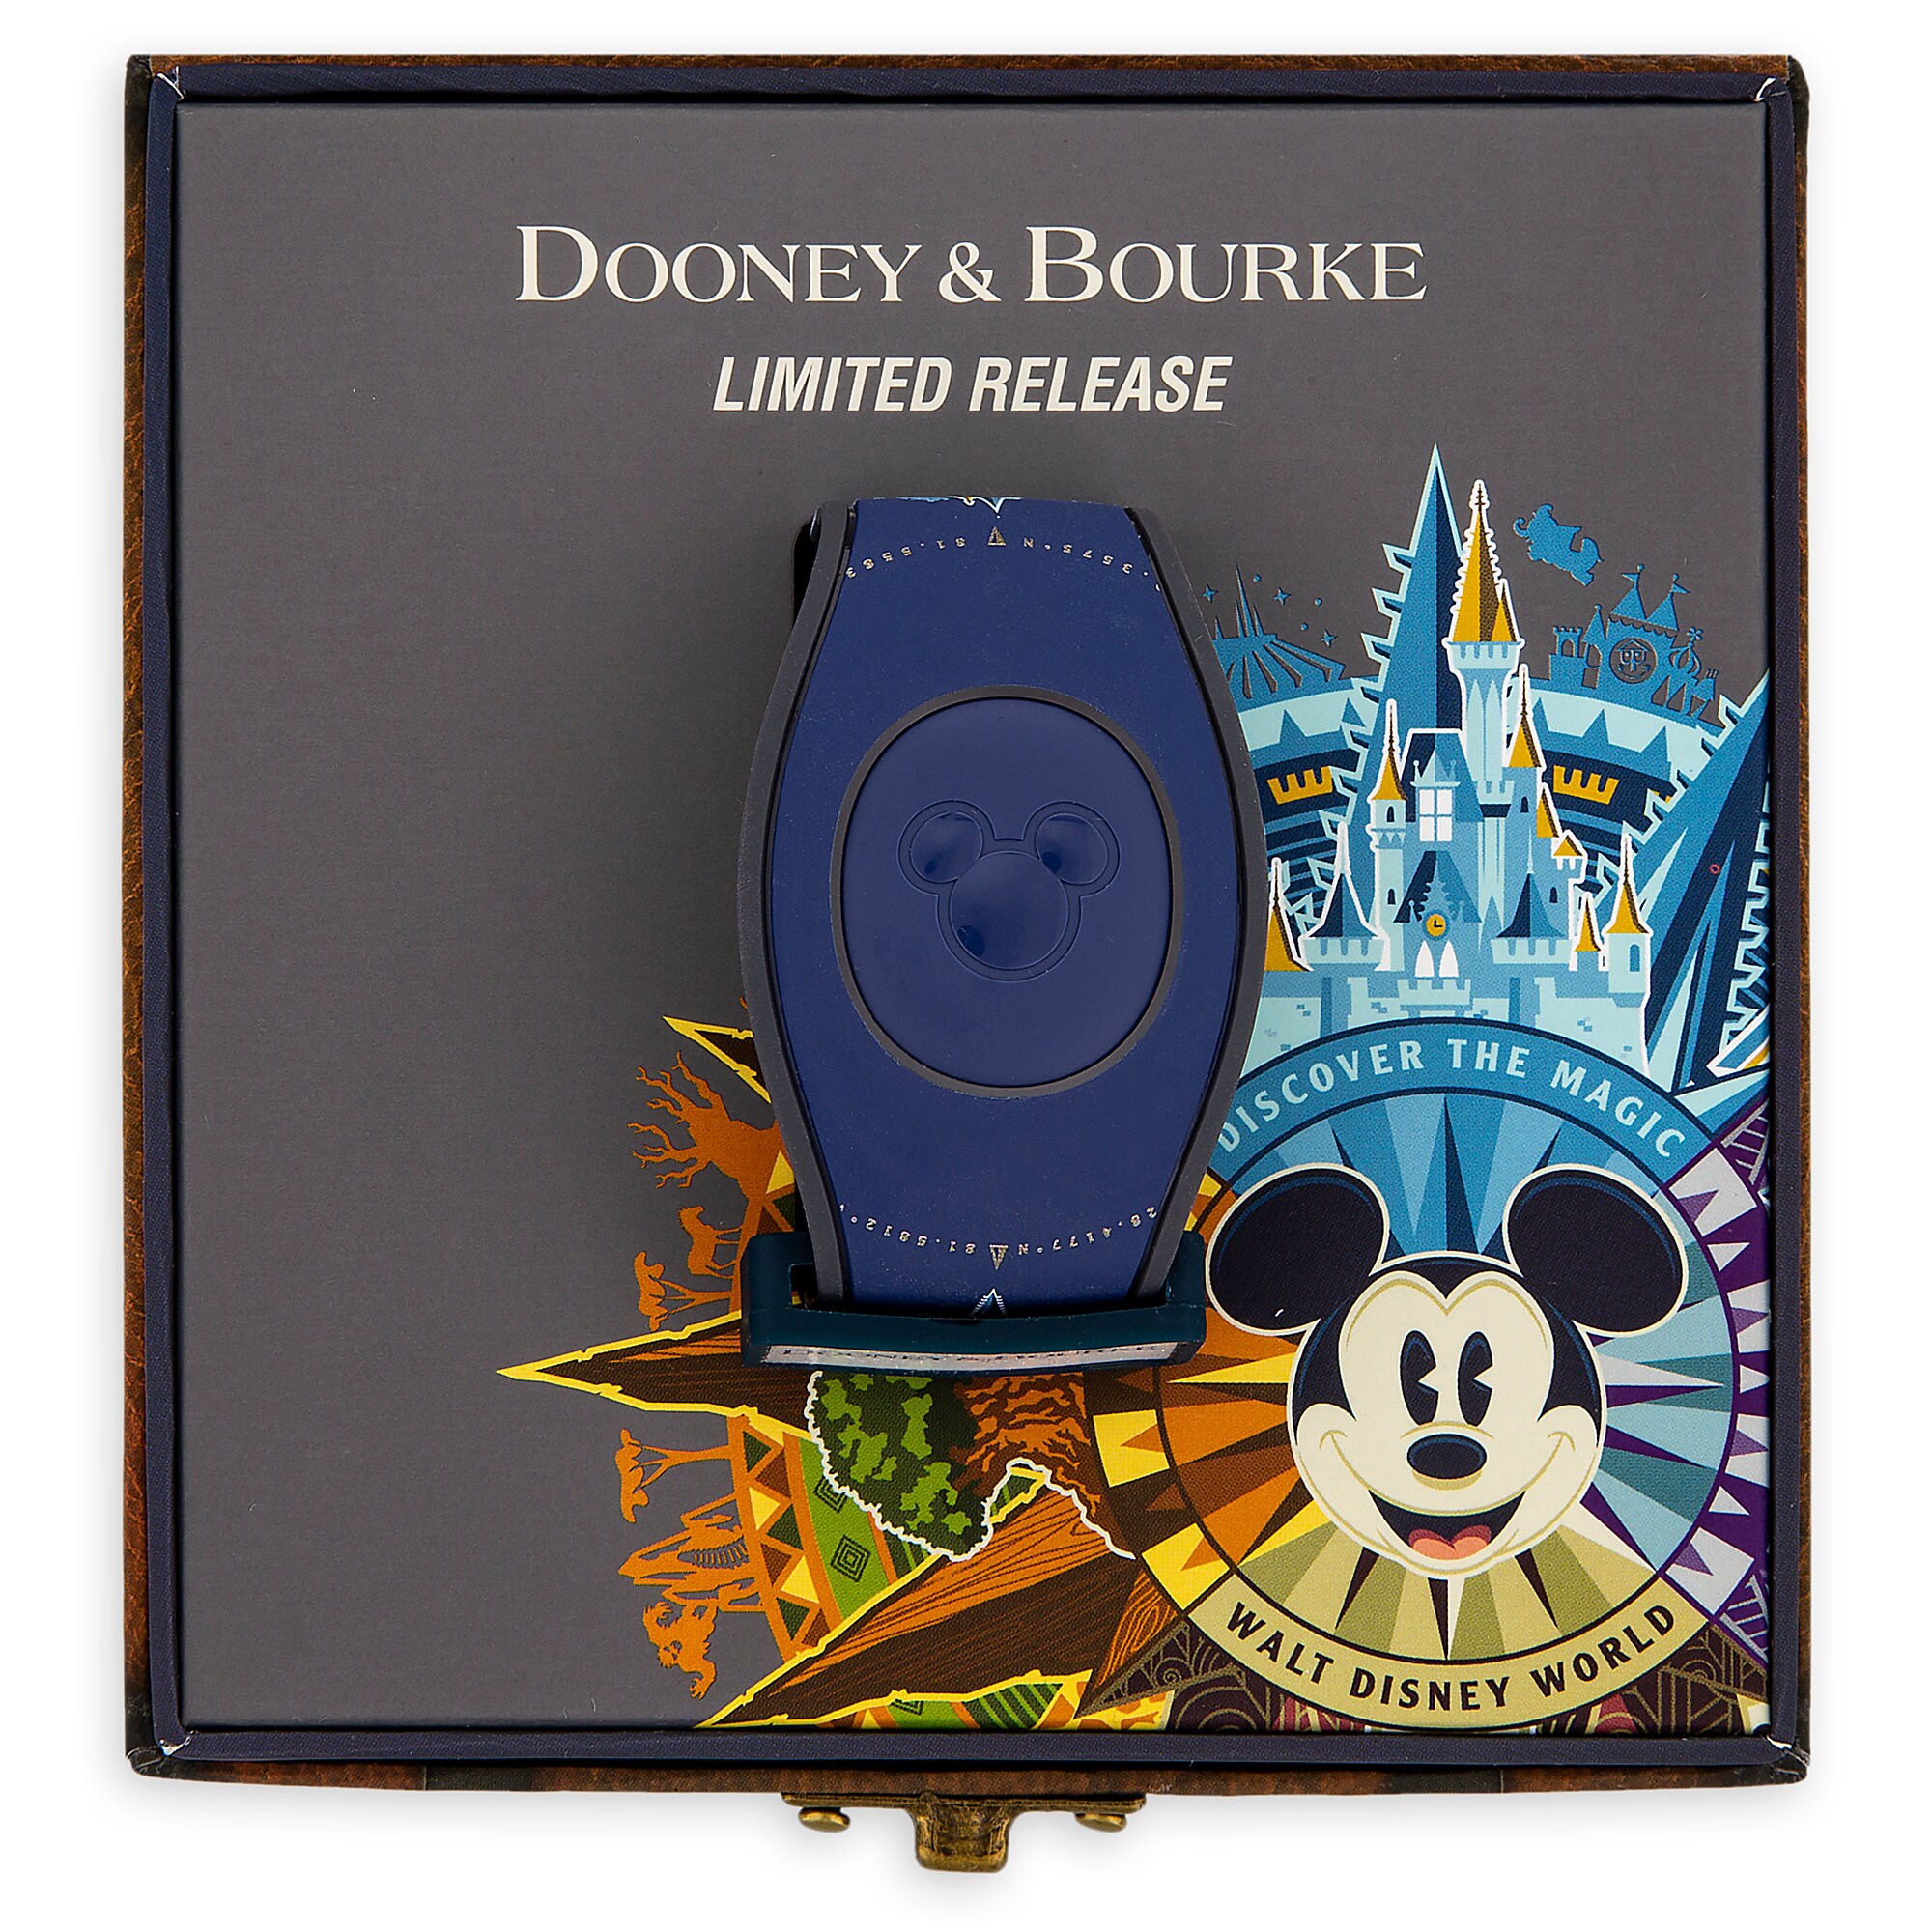 Walt Disney World Passport Collection MagicBand 2 by Dooney & Bourke - Limited Release